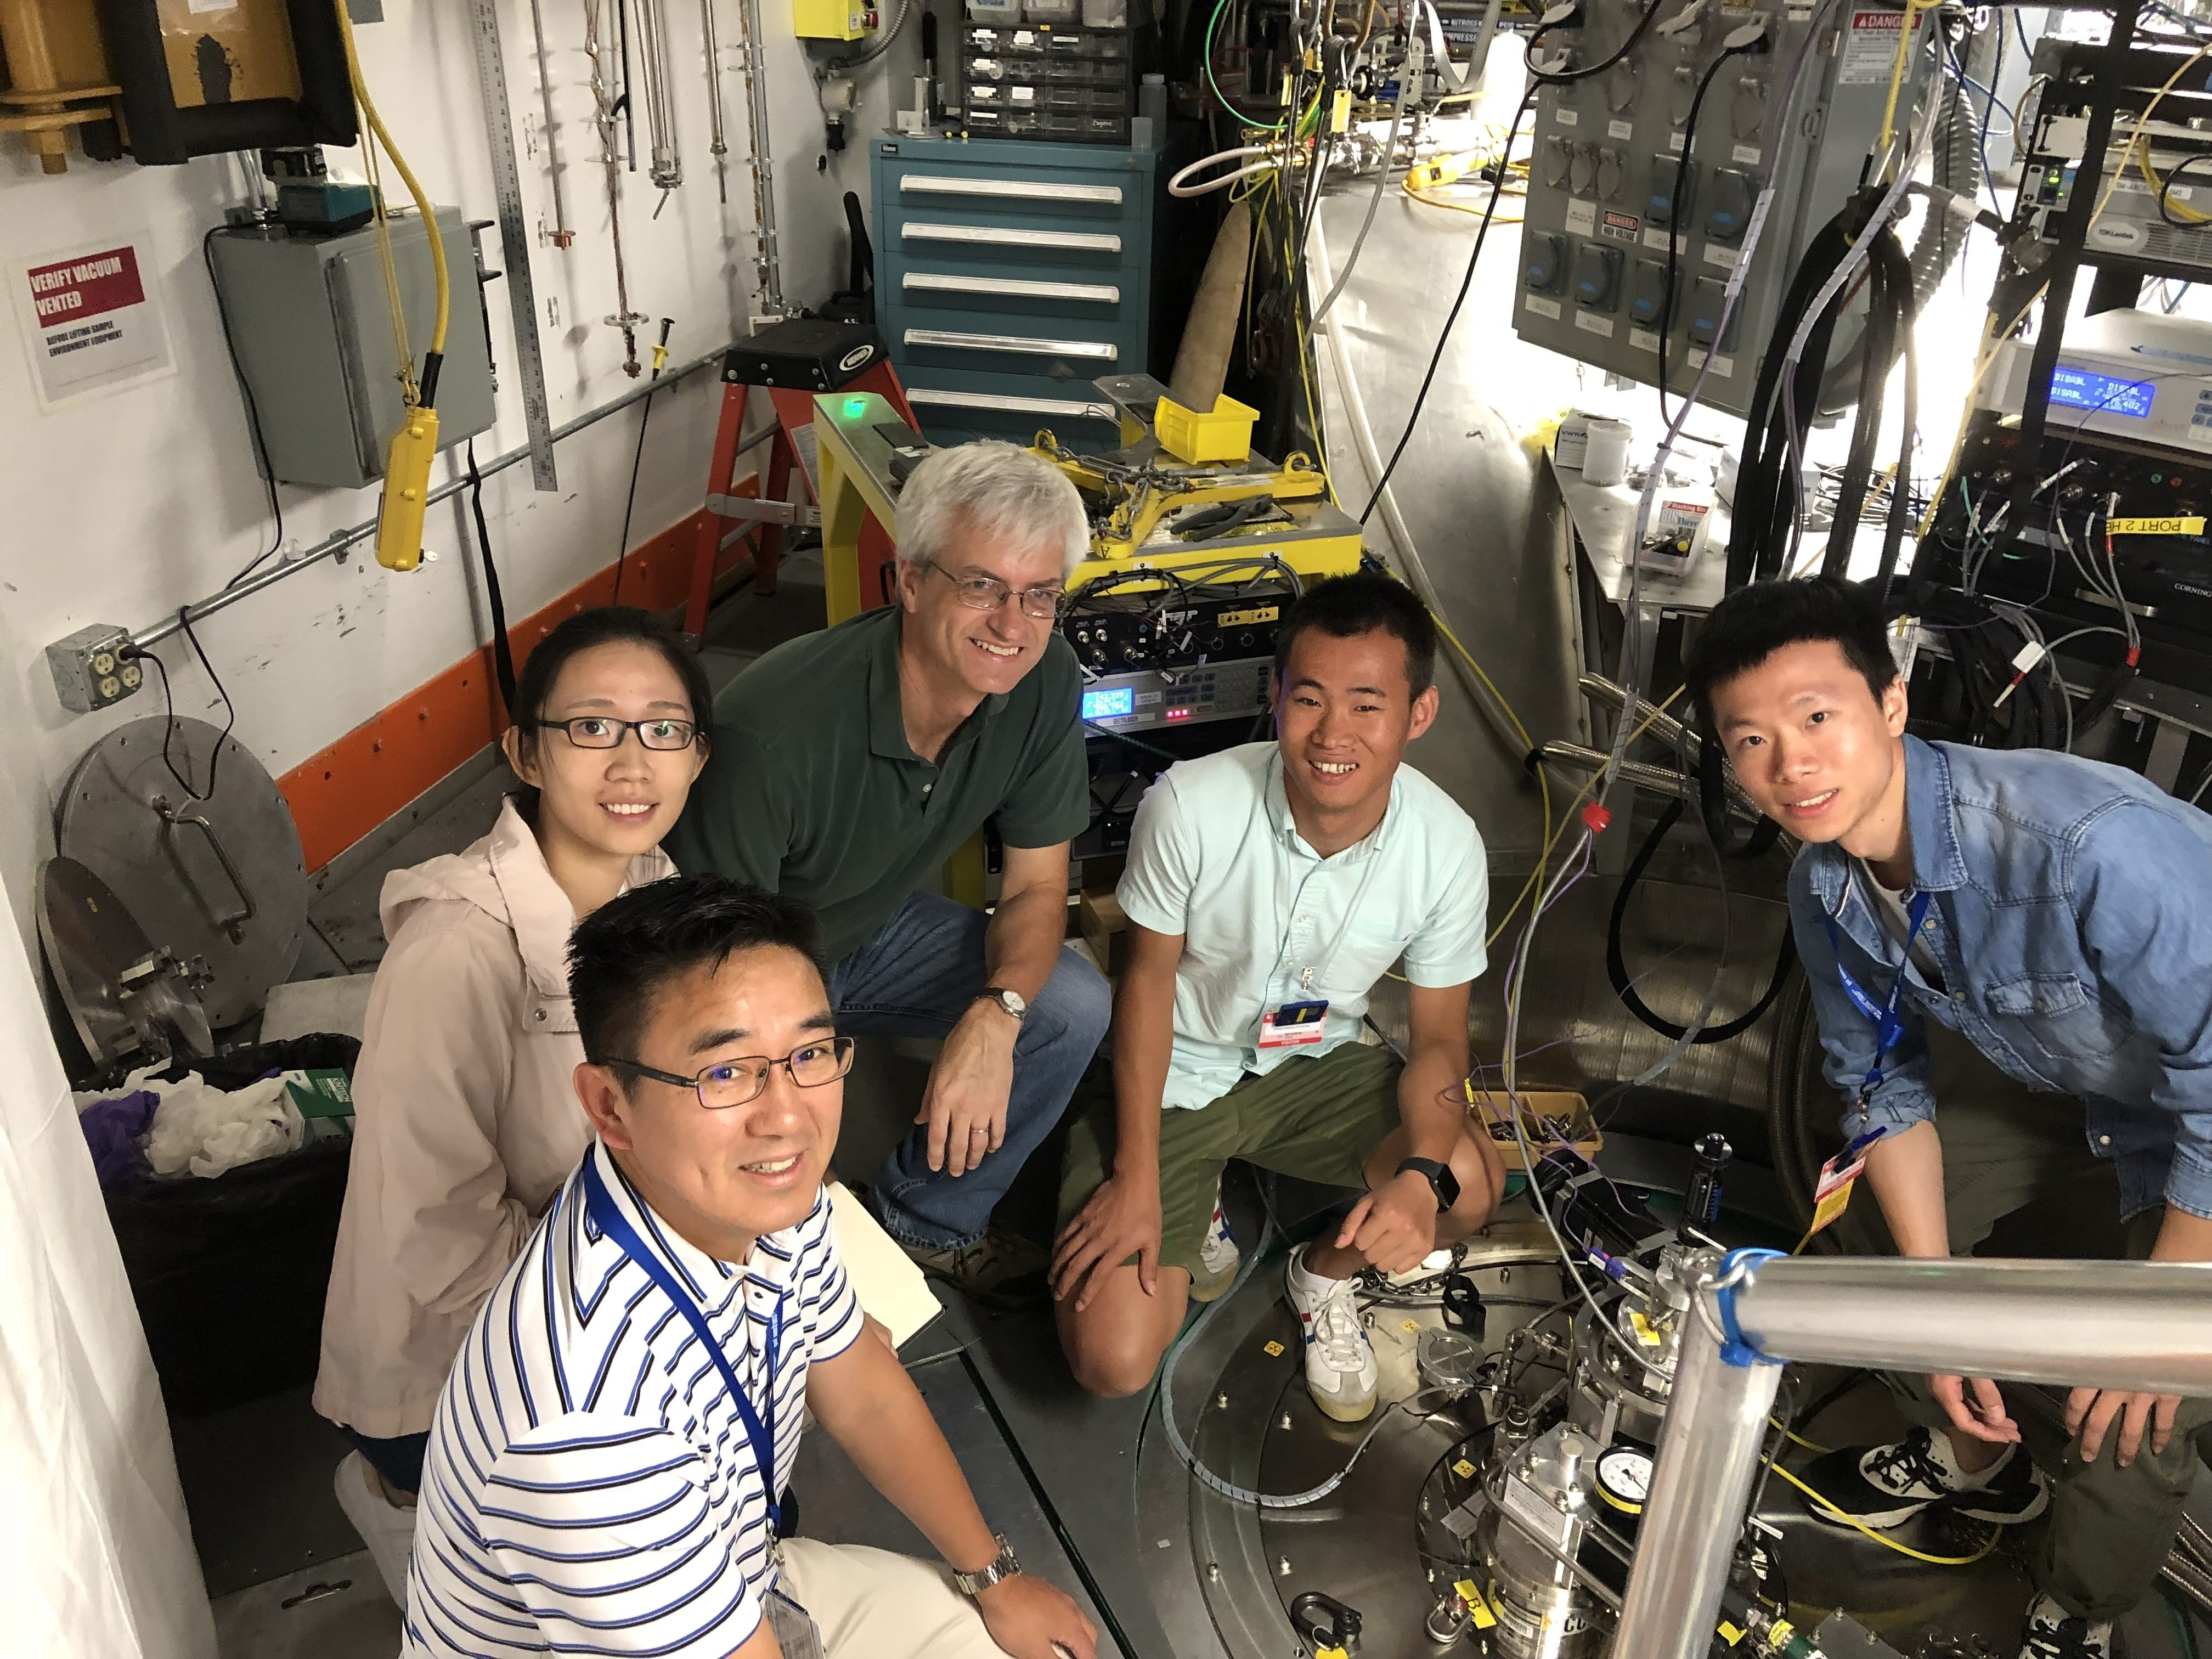 High-frequency transverse phonons in amorphous materials observed for the first time